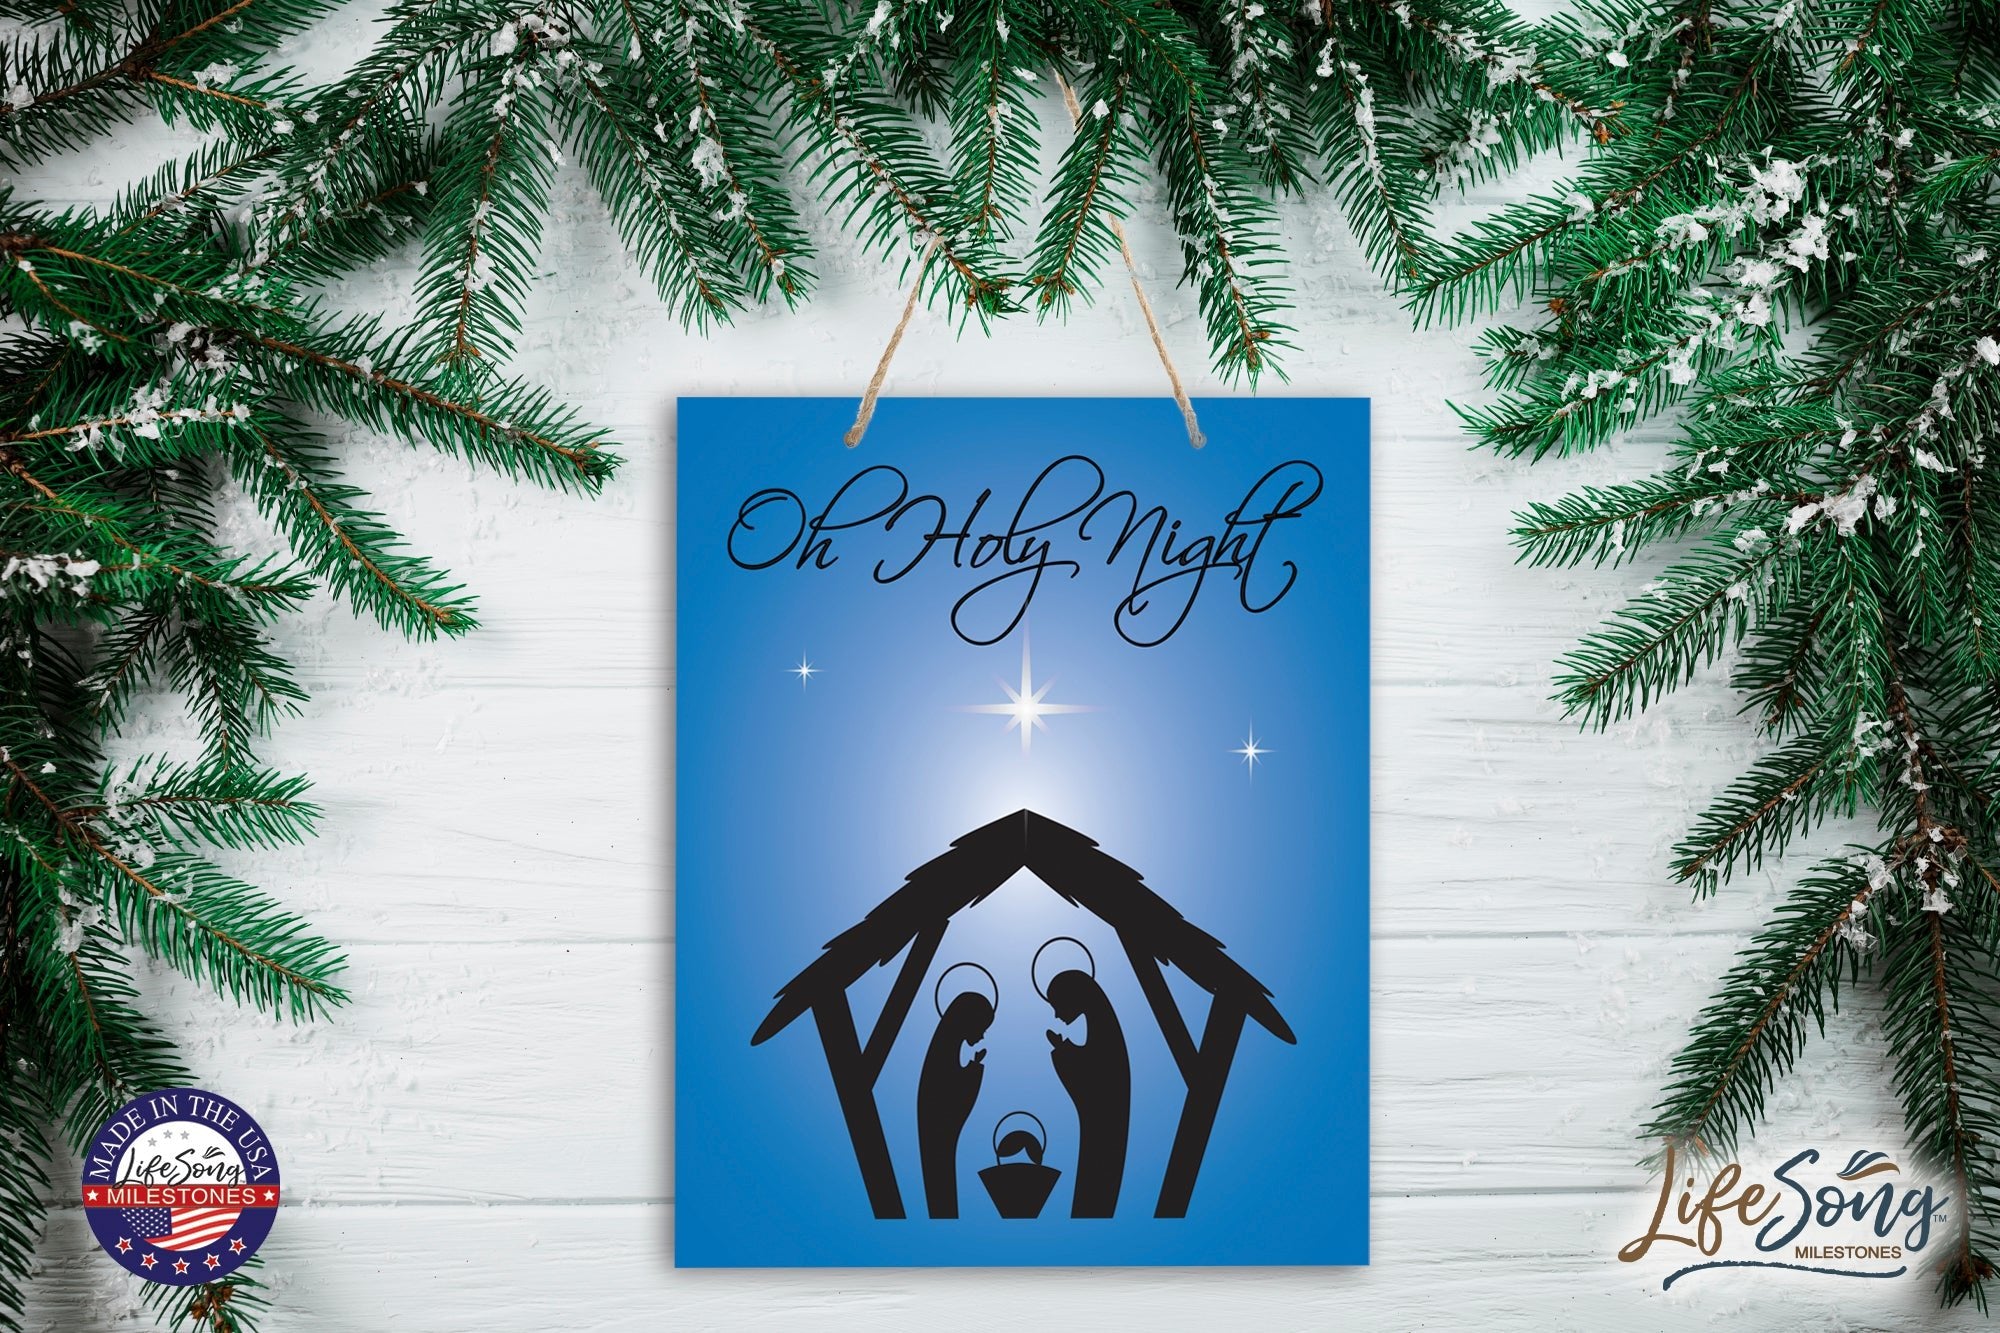 Merry Christmas Wall Hanging Sign - Oh Holy Night - LifeSong Milestones